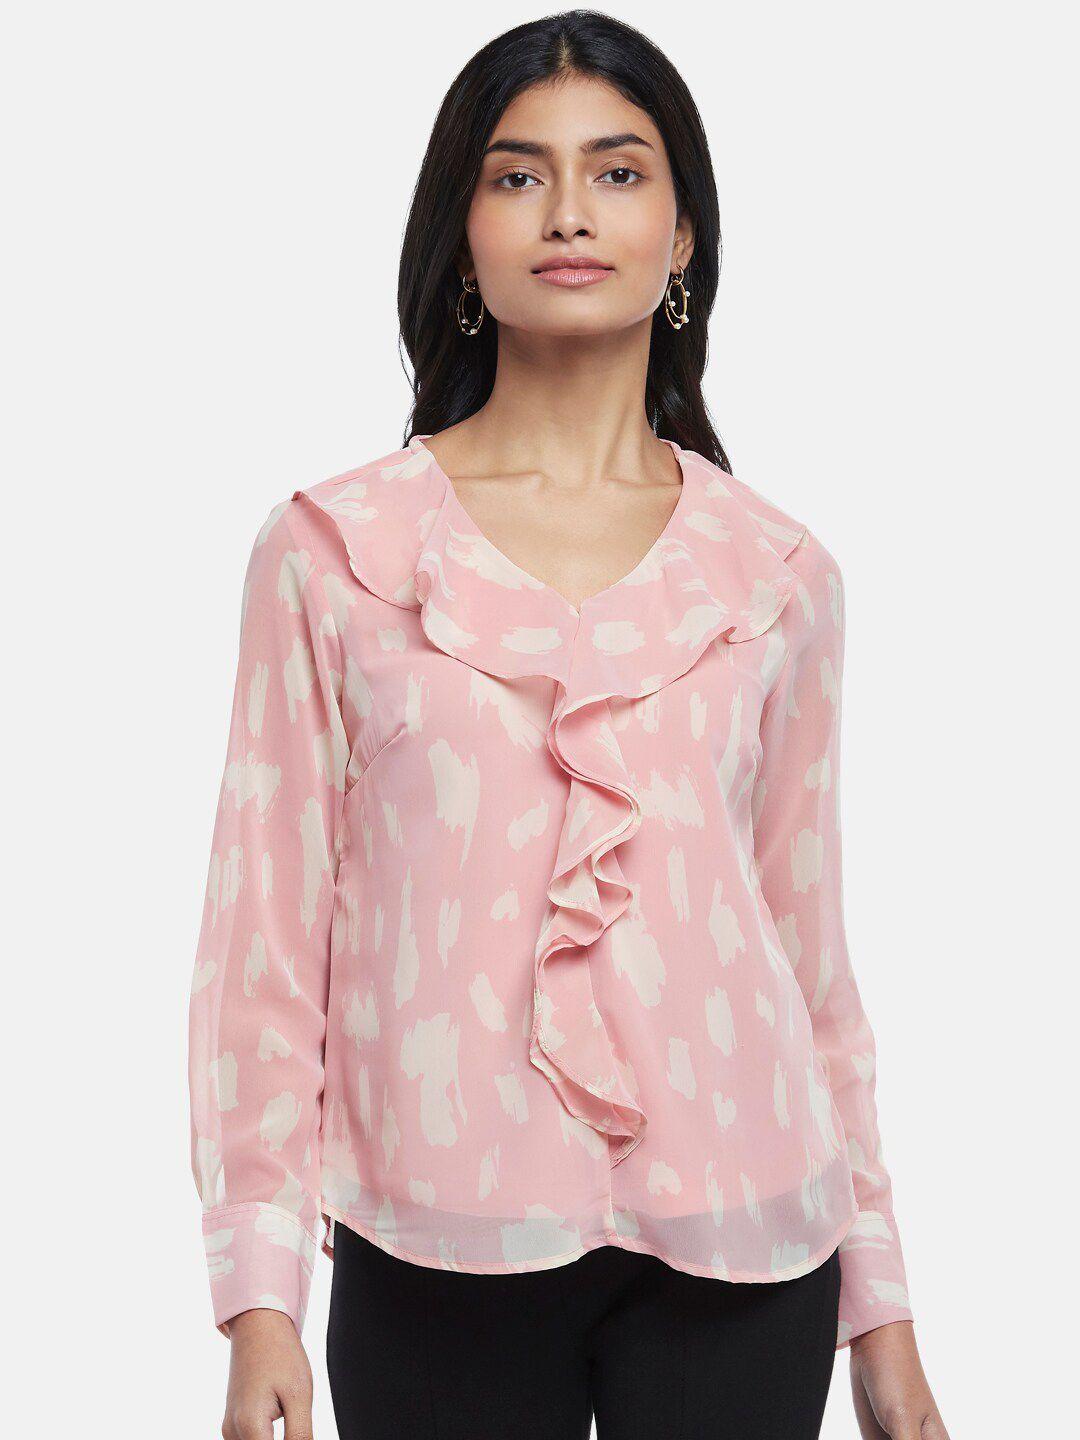 annabelle by pantaloons pink print top